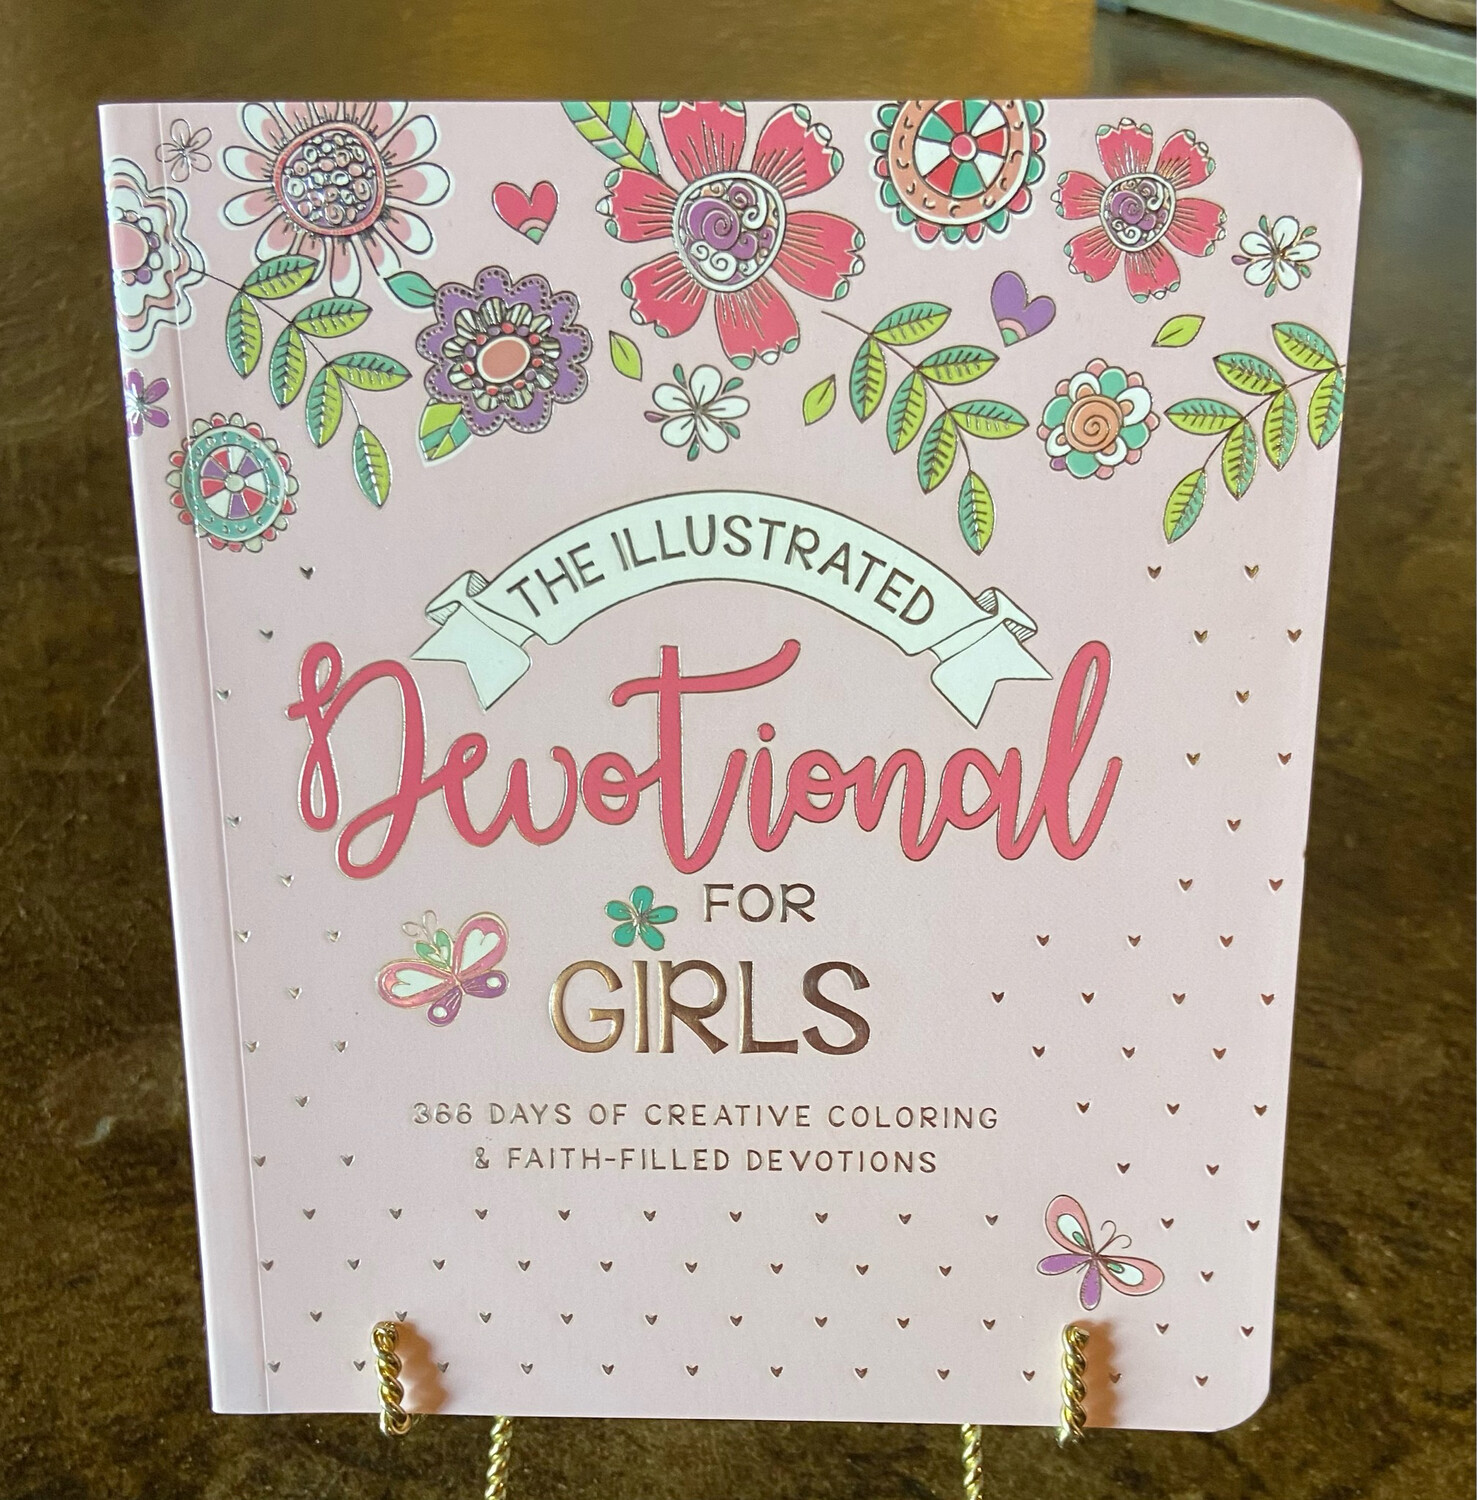 The Illustrated Devotional For Girls: 366 Days Of Creative Coloring & Faith-Filled Devotions